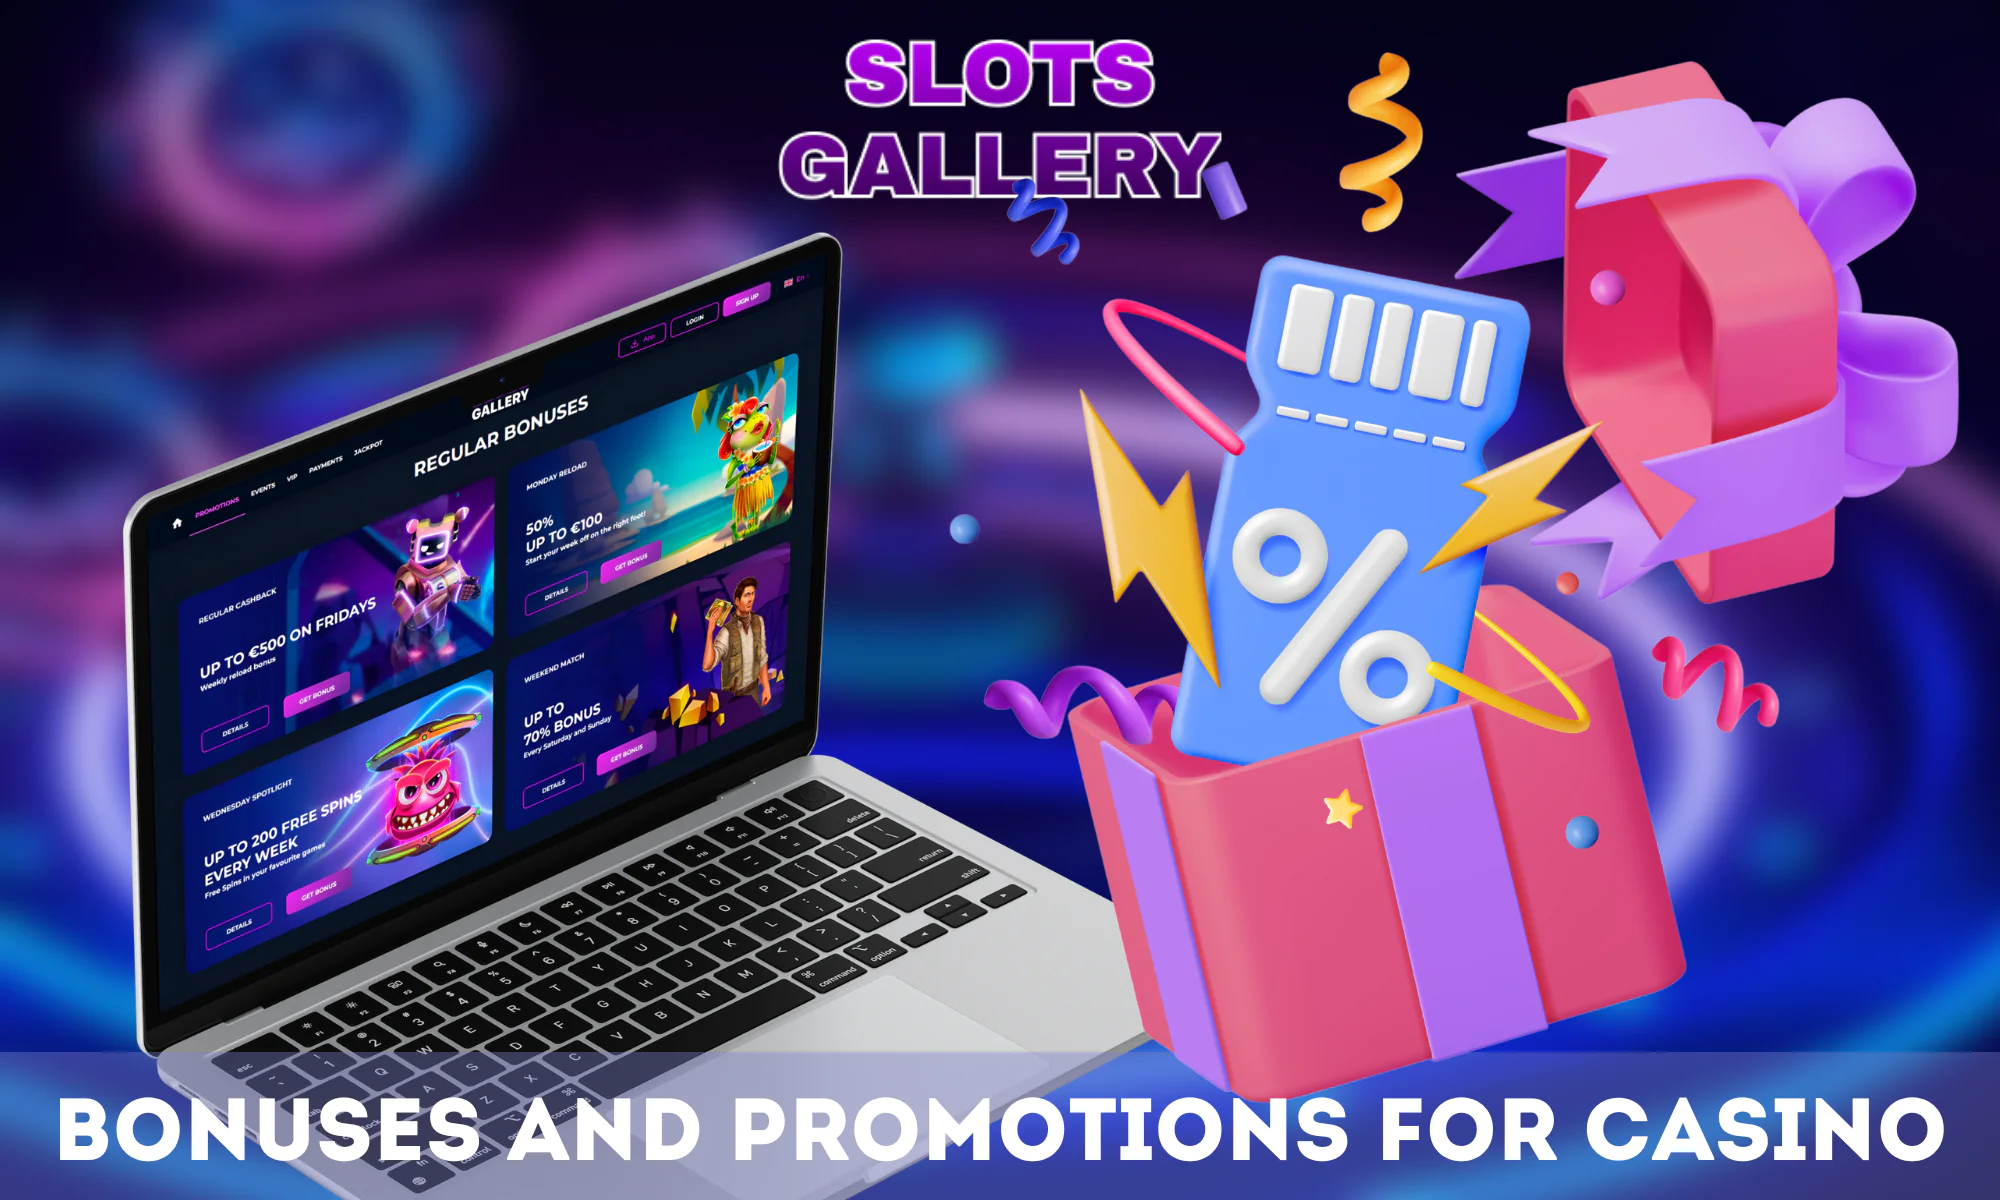 Slots Gallery is offering bonus offers for players from New Zealand